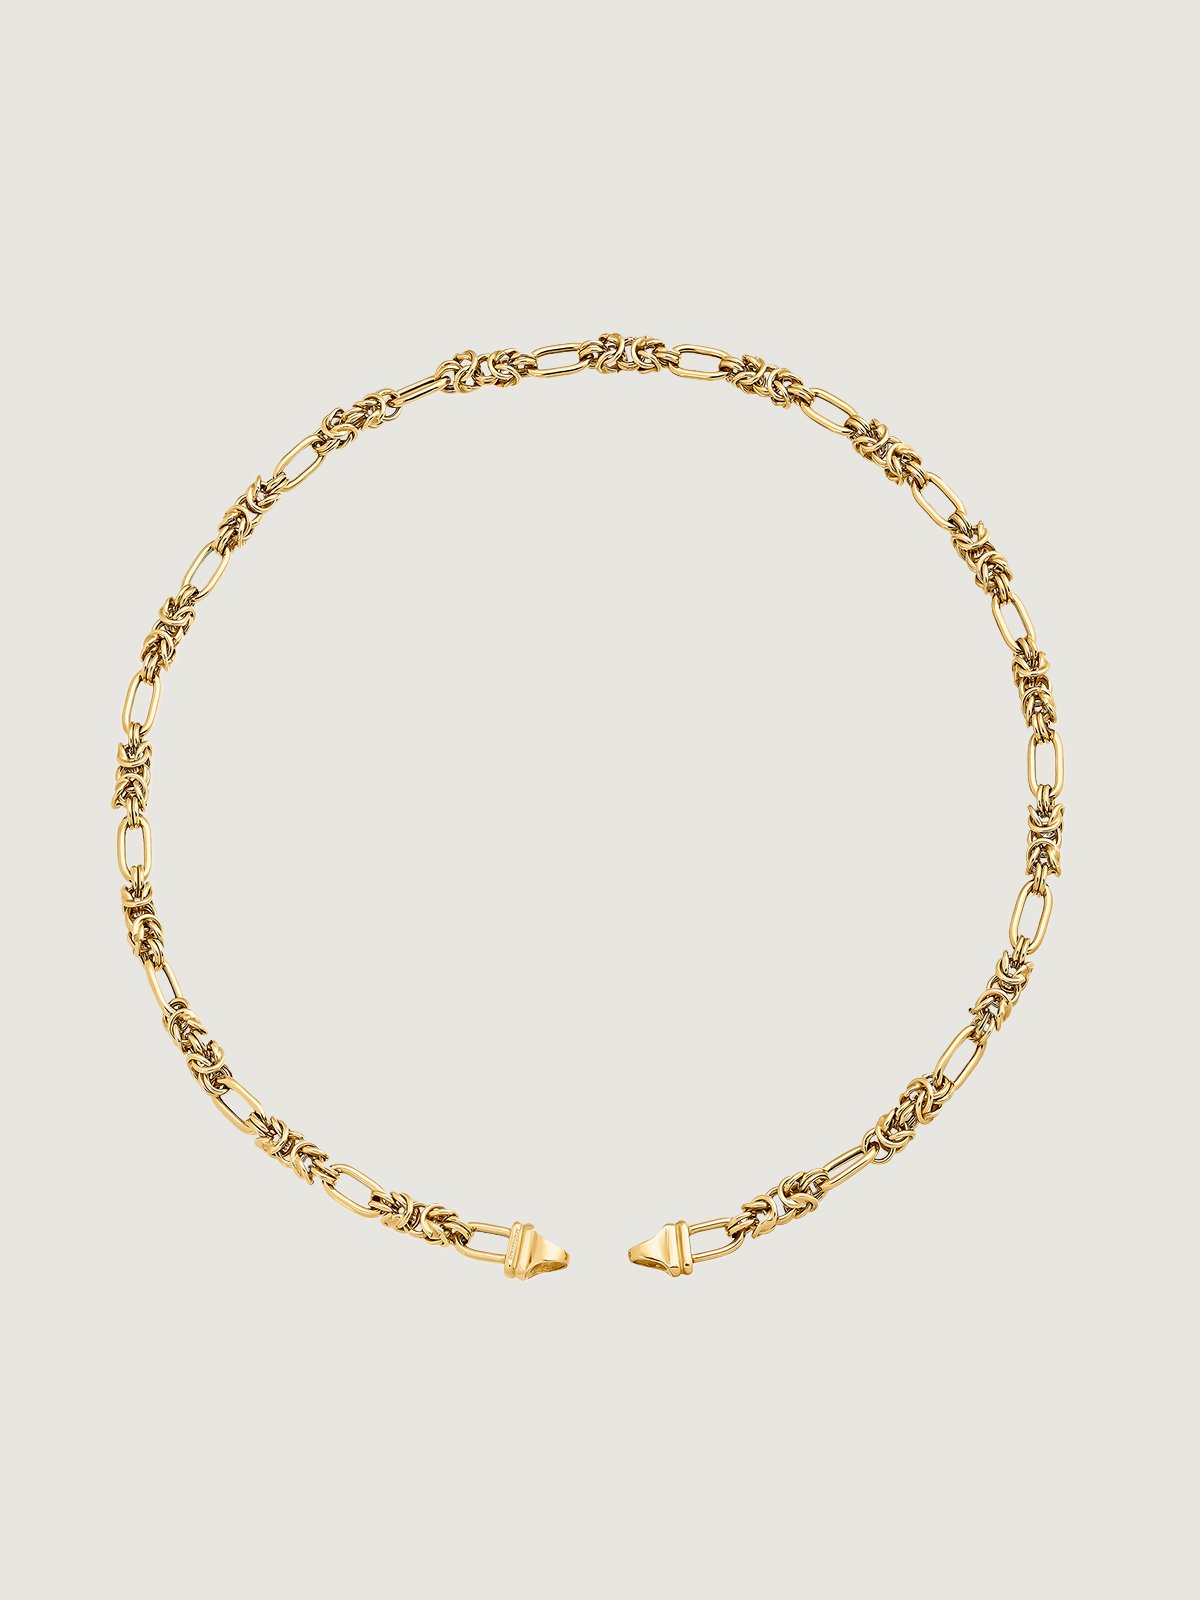 Combination link chain made of 925 silver, bathed in 18K yellow gold